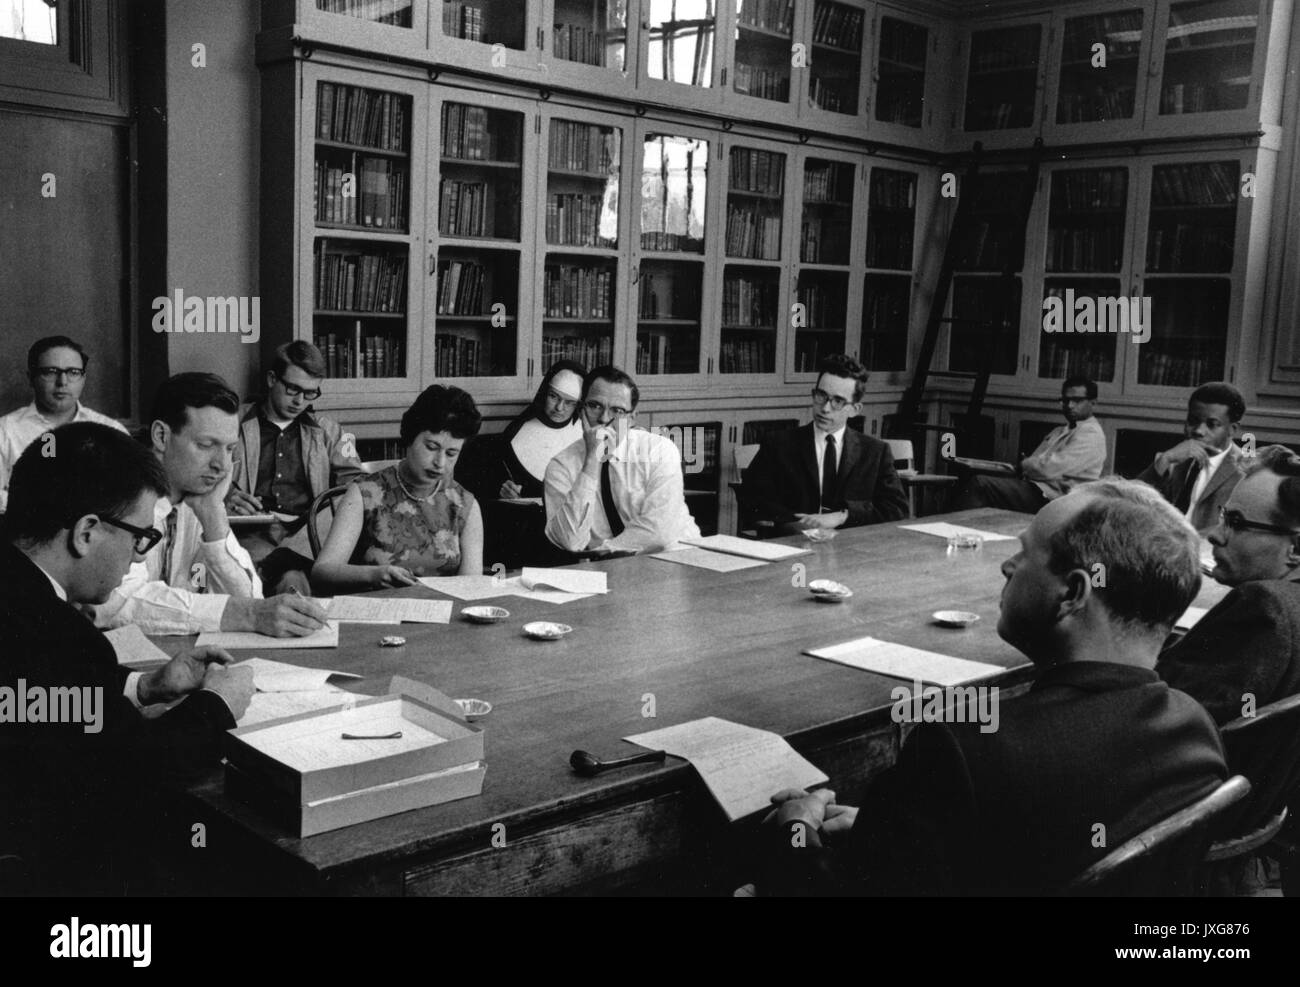 Economics, Classes, Carl Christ, African American Students, Candid shot taken during an economics seminar, Students are sitting around a large desk, listening and taking notes during the lecture, 1963. Stock Photo